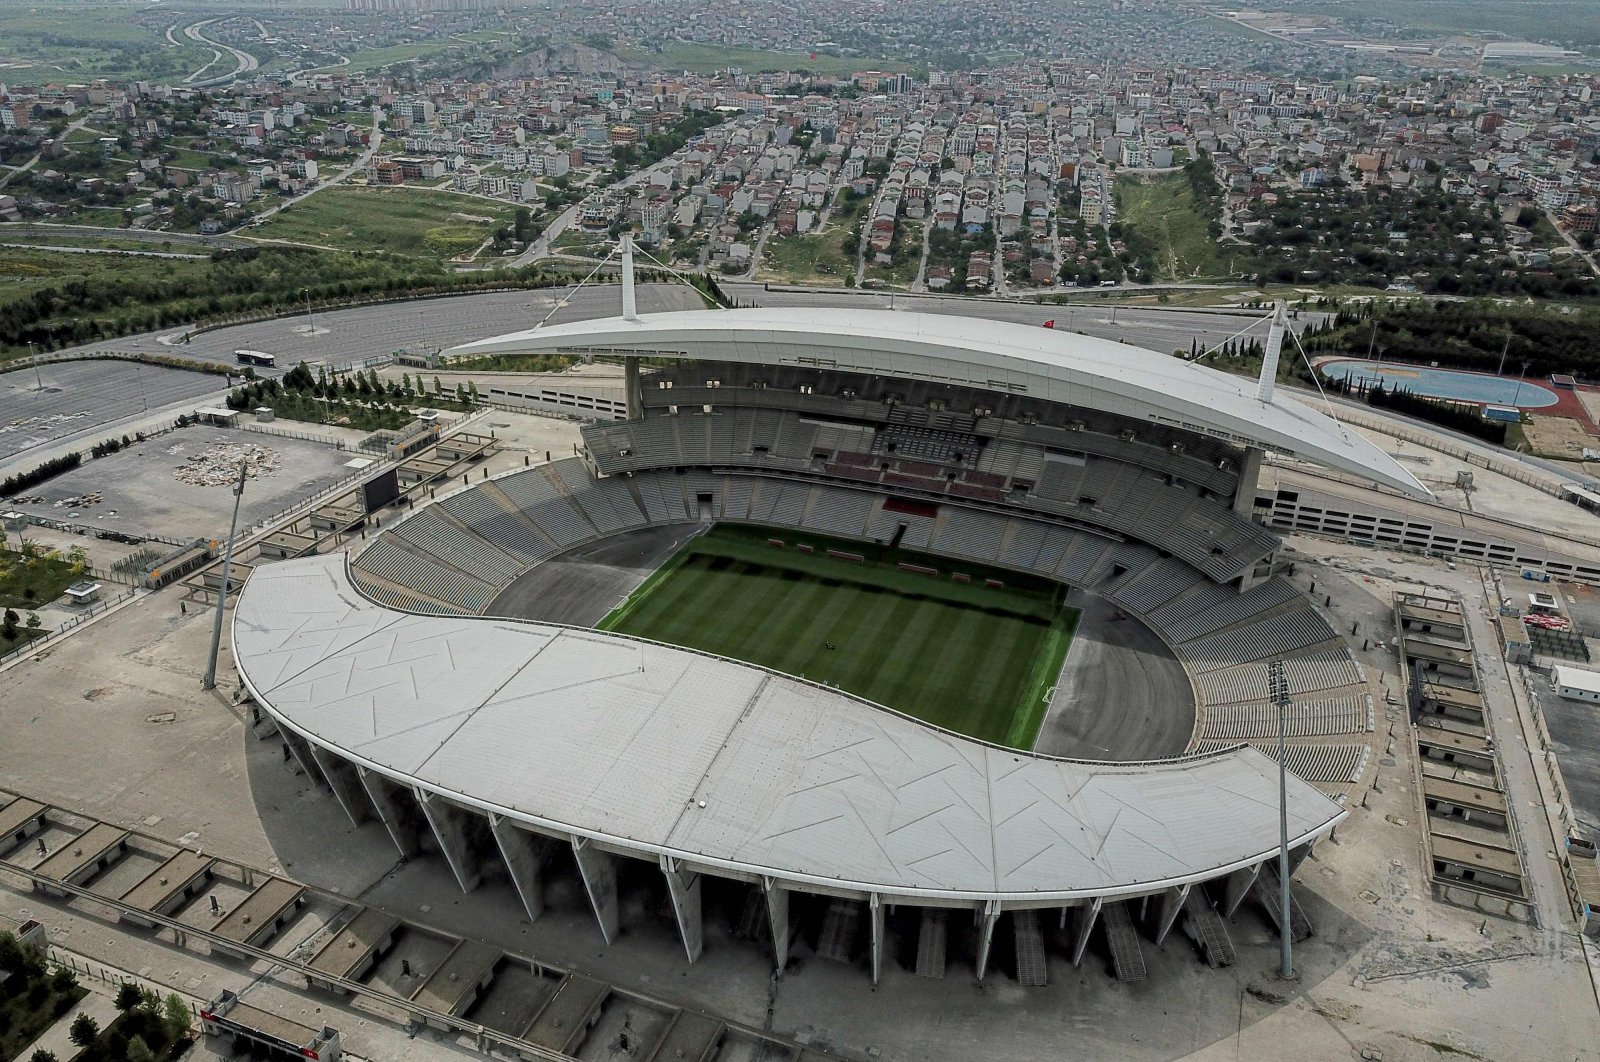 An aerial view shows Atatürk Olympic Stadium, slated to host the 2020 Champions League final, in Istanbul, Turkey, May 19, 2020. (AFP Photo)